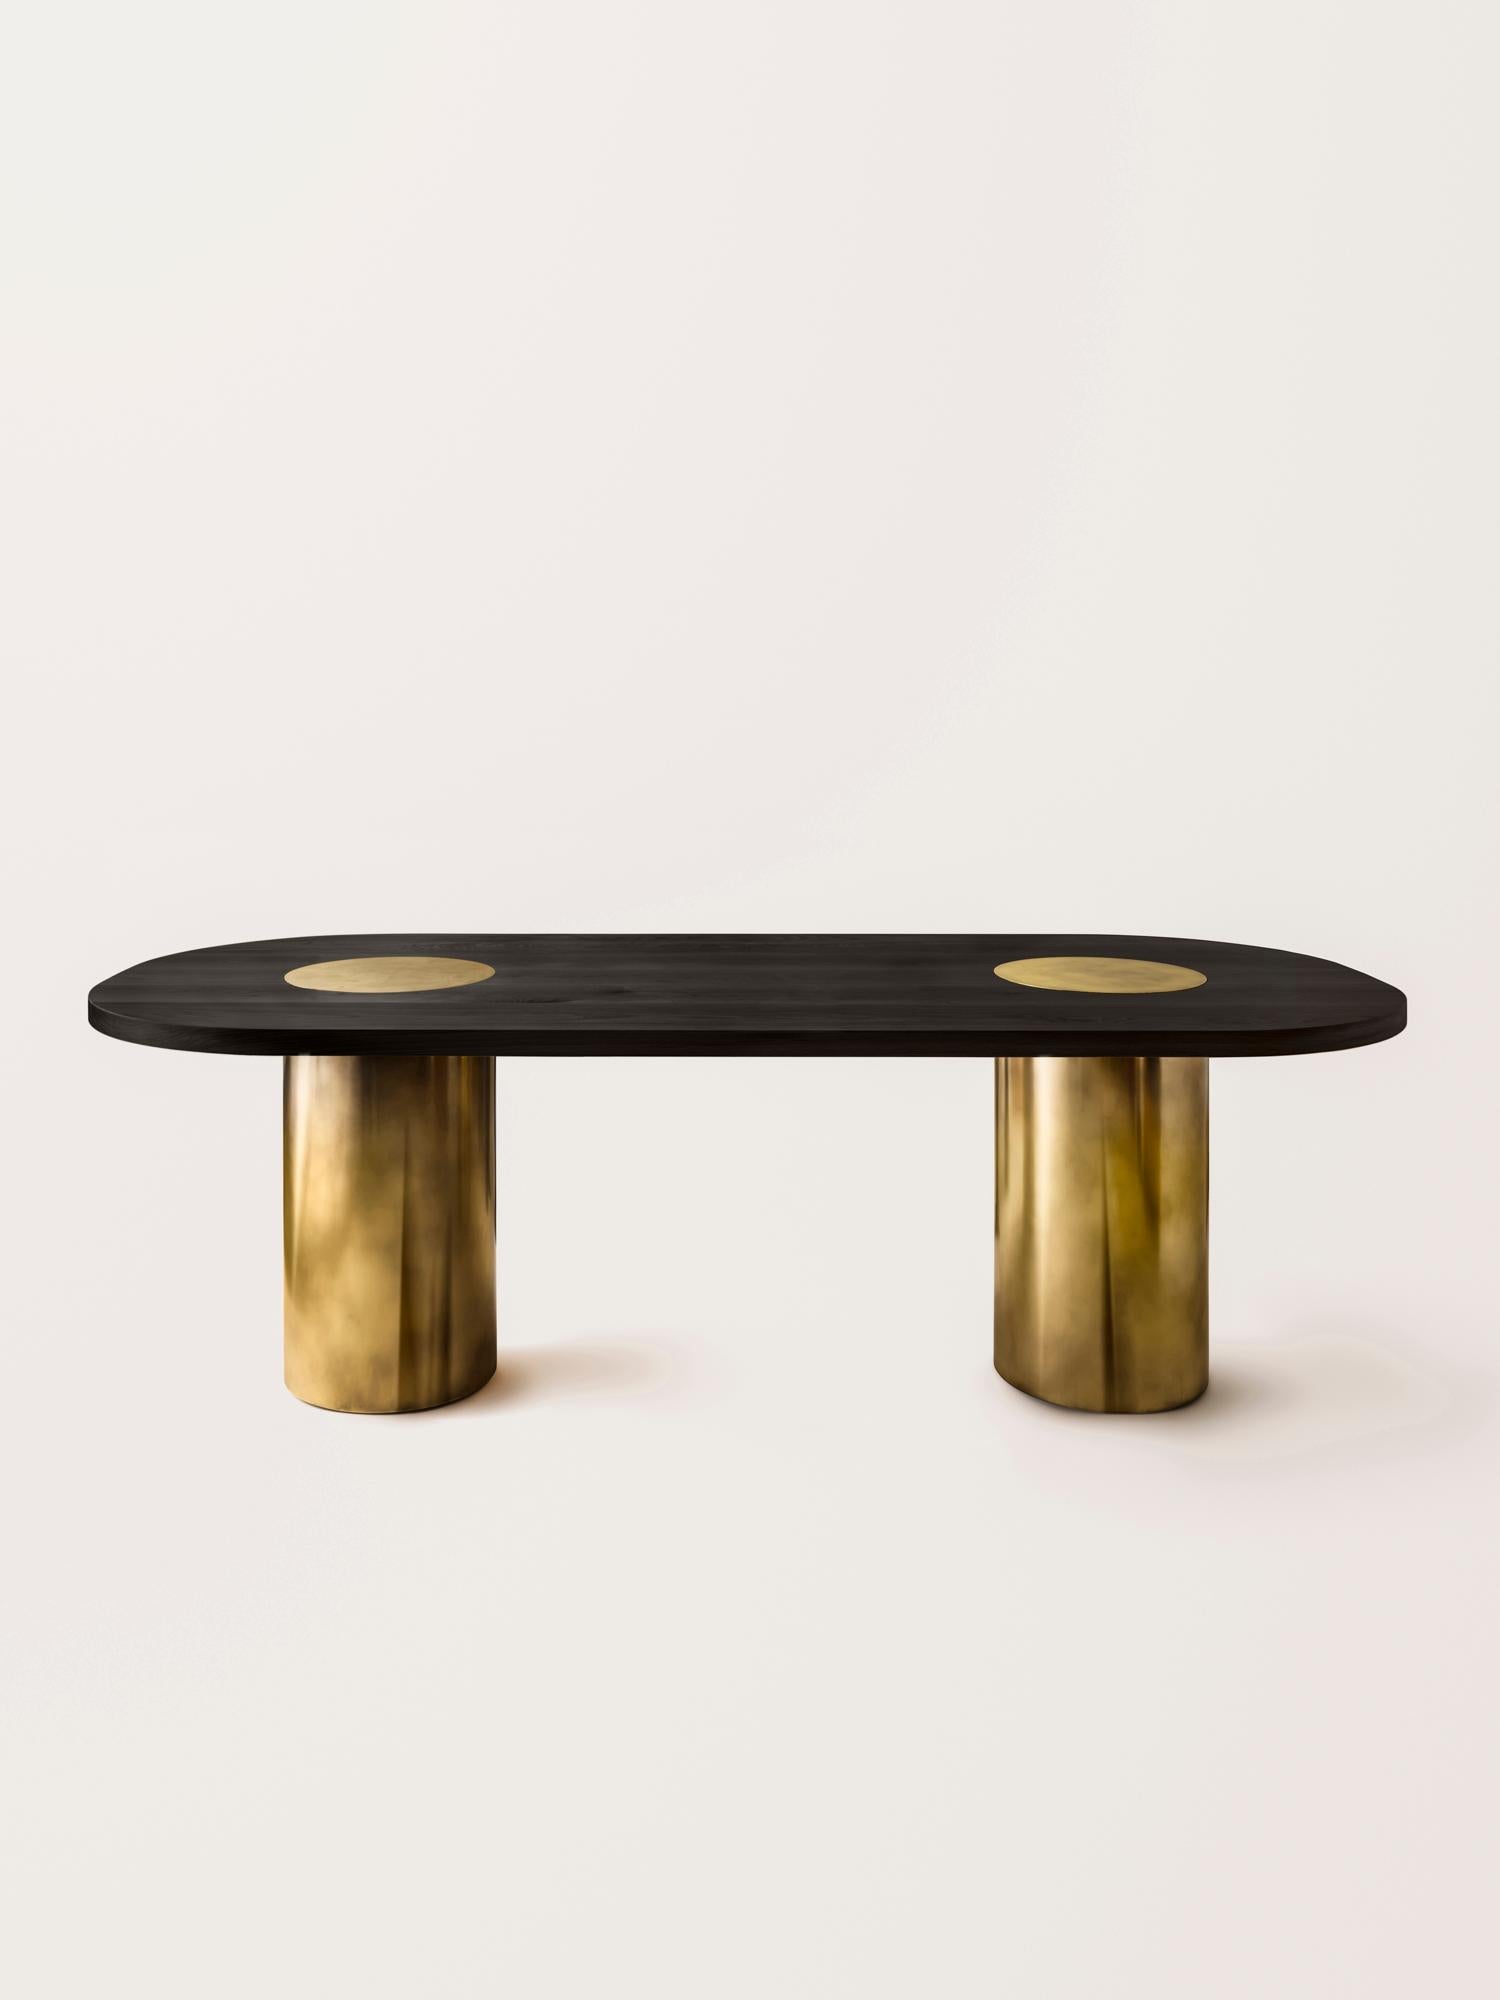 Silo Dining Table - Natural Oak and Burnished Brass For Sale 4